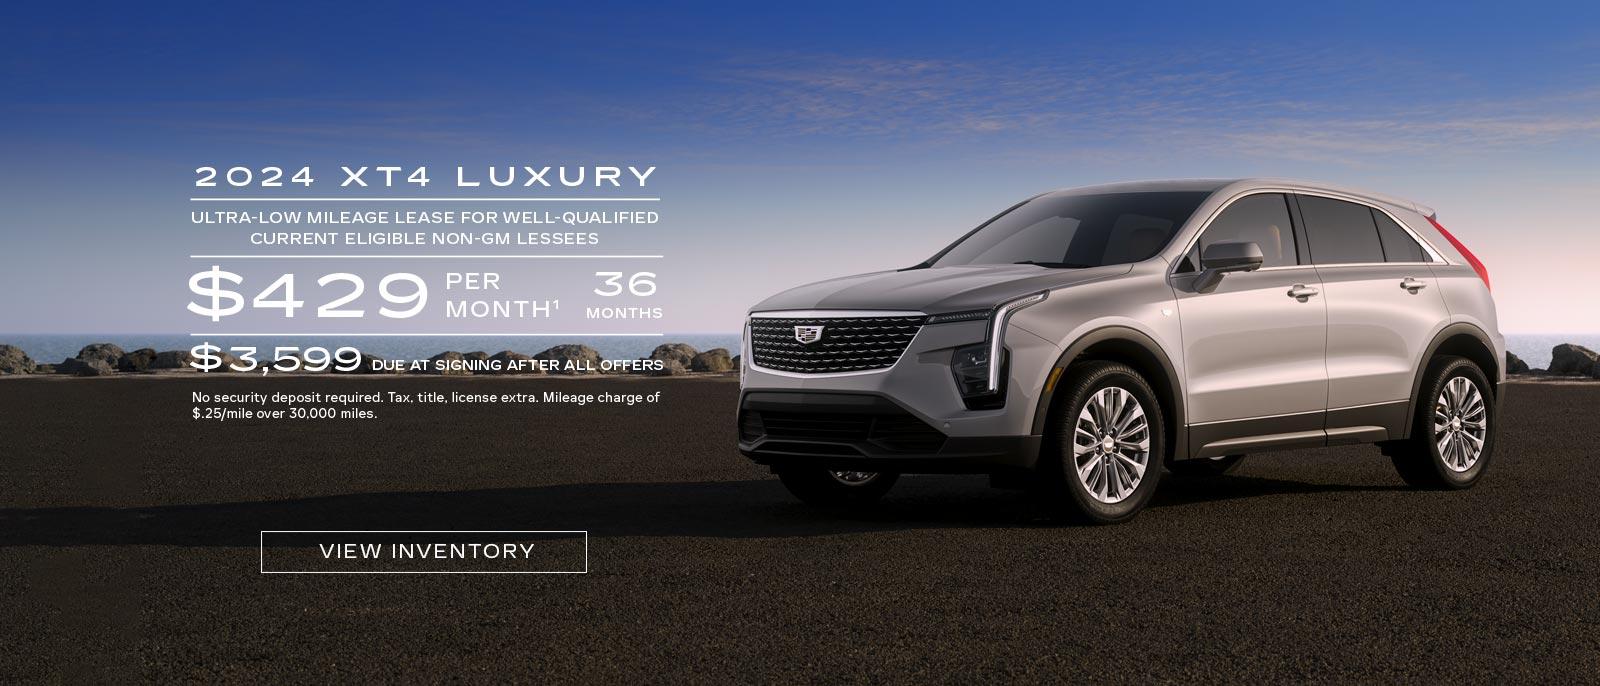 2024 XT4 Luxury. Ultra-low mileage lease for well-qualified current eligible Non-GM Lessees. $429 per month. 36 months. $3,599 due at signing after all offers.